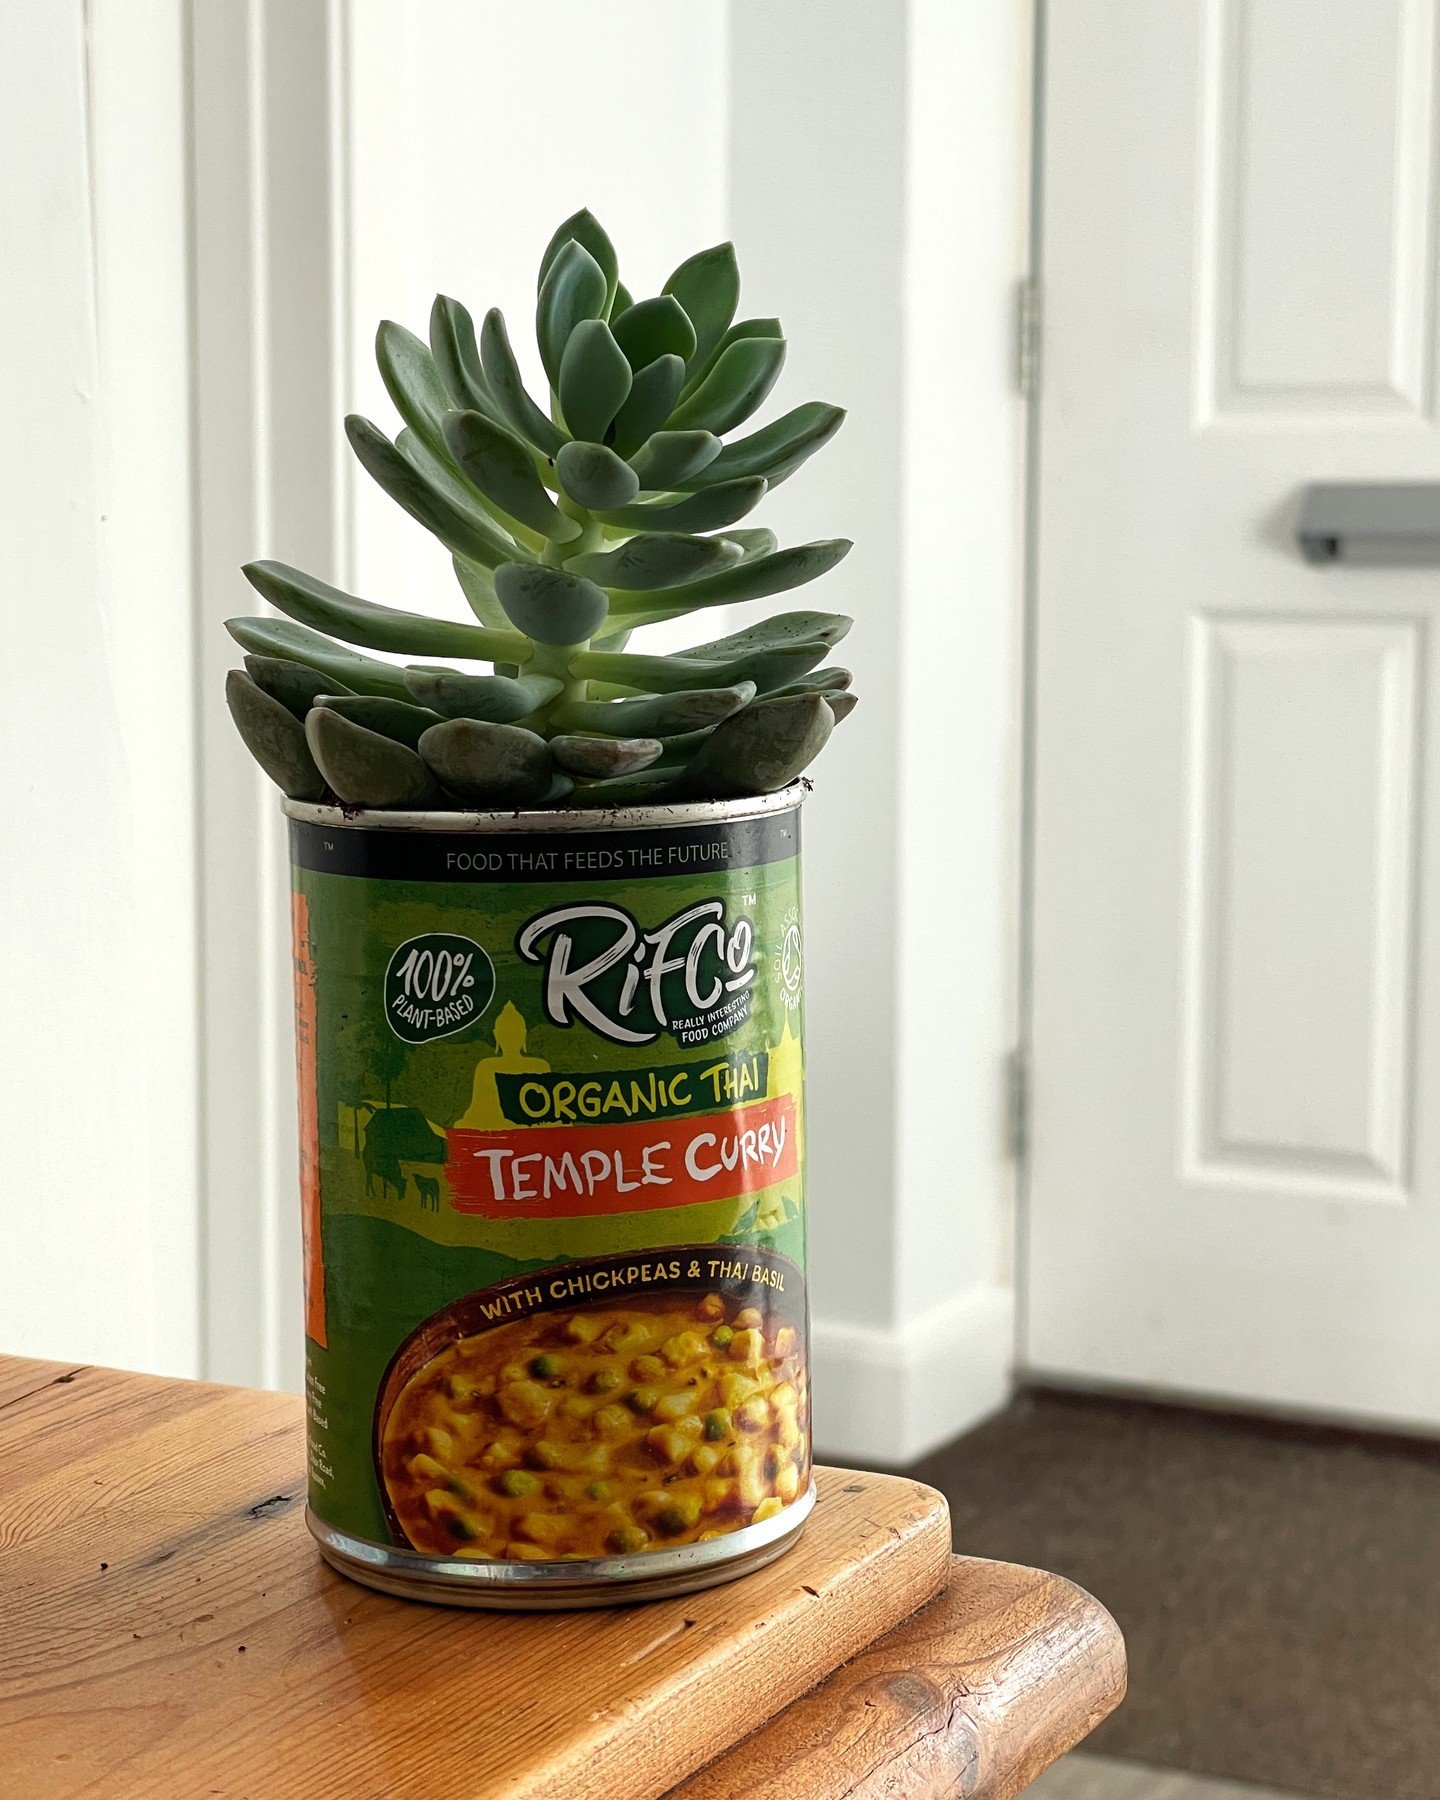 Before you throw your food tins out, consider if they could be reused for anything in your home, such as a small pot for your houseplants 🌱

Once it's fully grown and been transferred, you could plant another, use the tin for arts &amp; crafts, or r